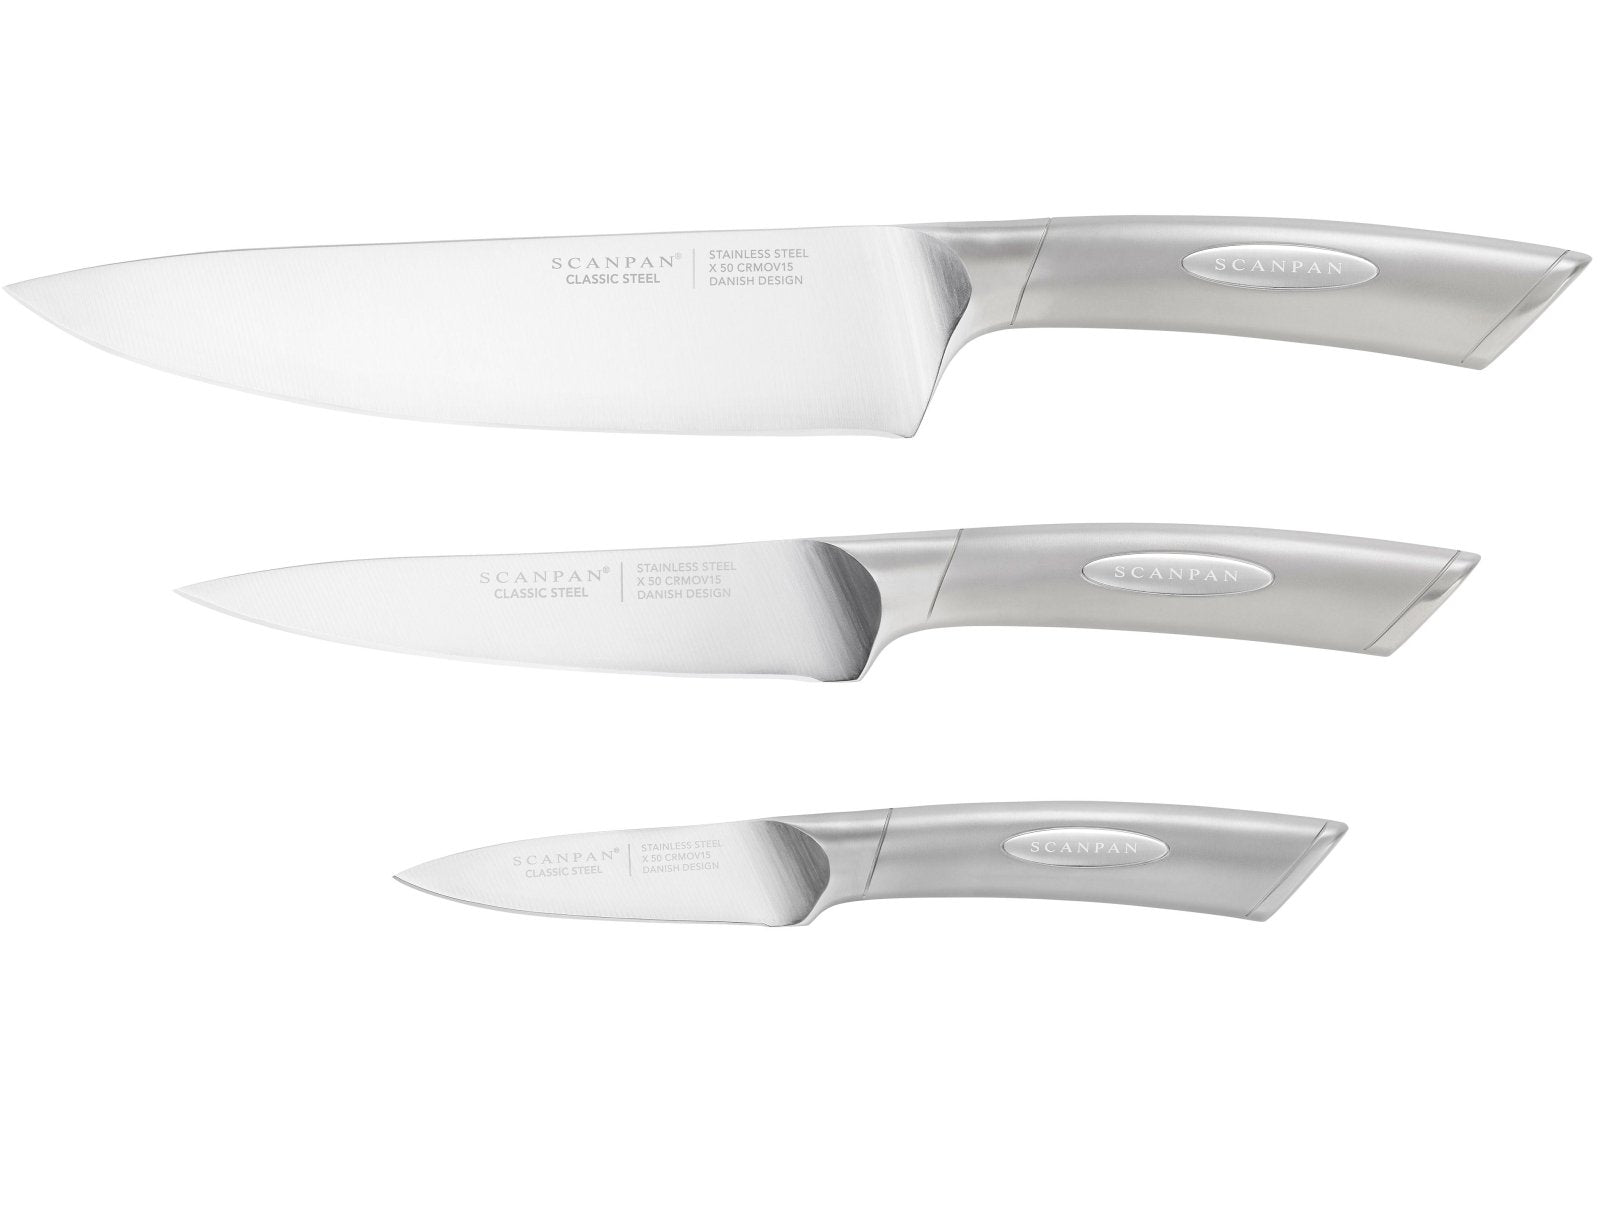 Scanpan Classic Steel 3pc Starter Set - SP9001001800 - The Cotswold Knife Company